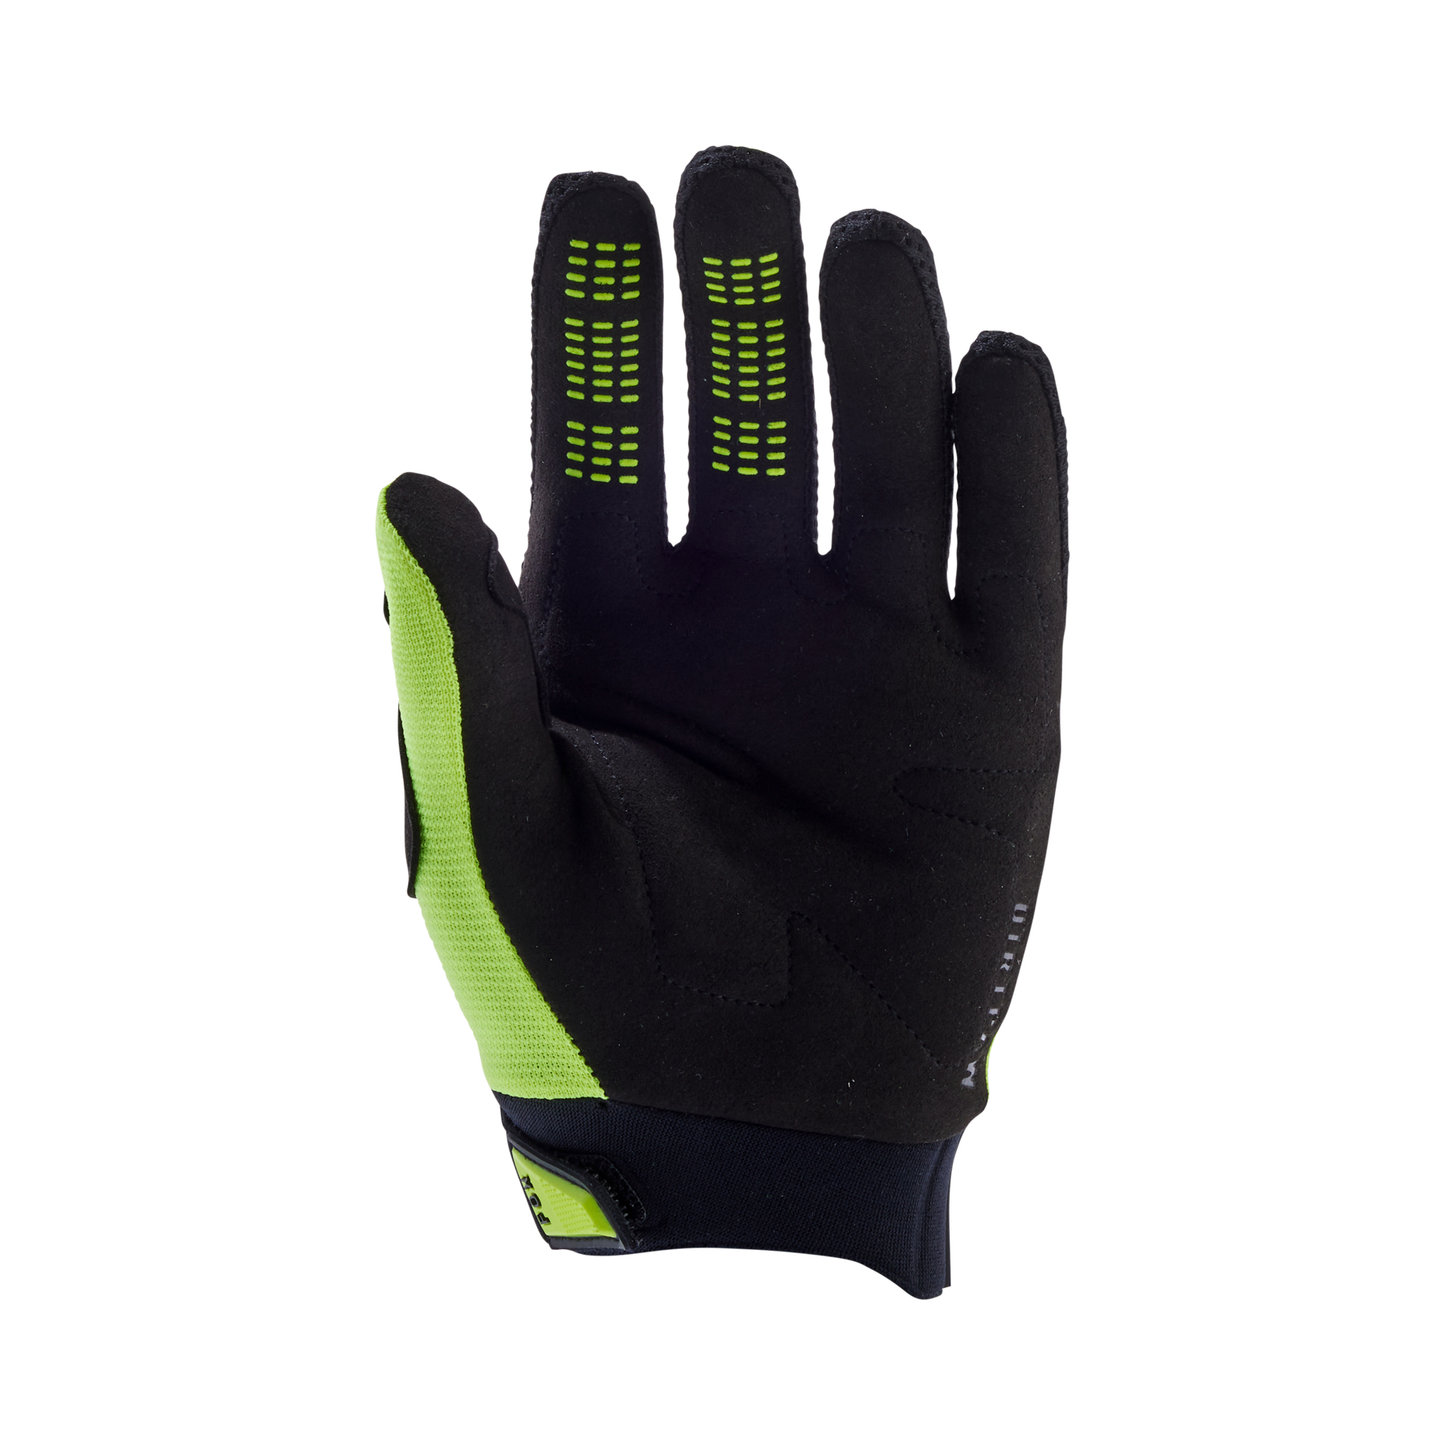 Fox Dirtpaw Youth Gloves - Youth L - Flo Yellow - Image 2